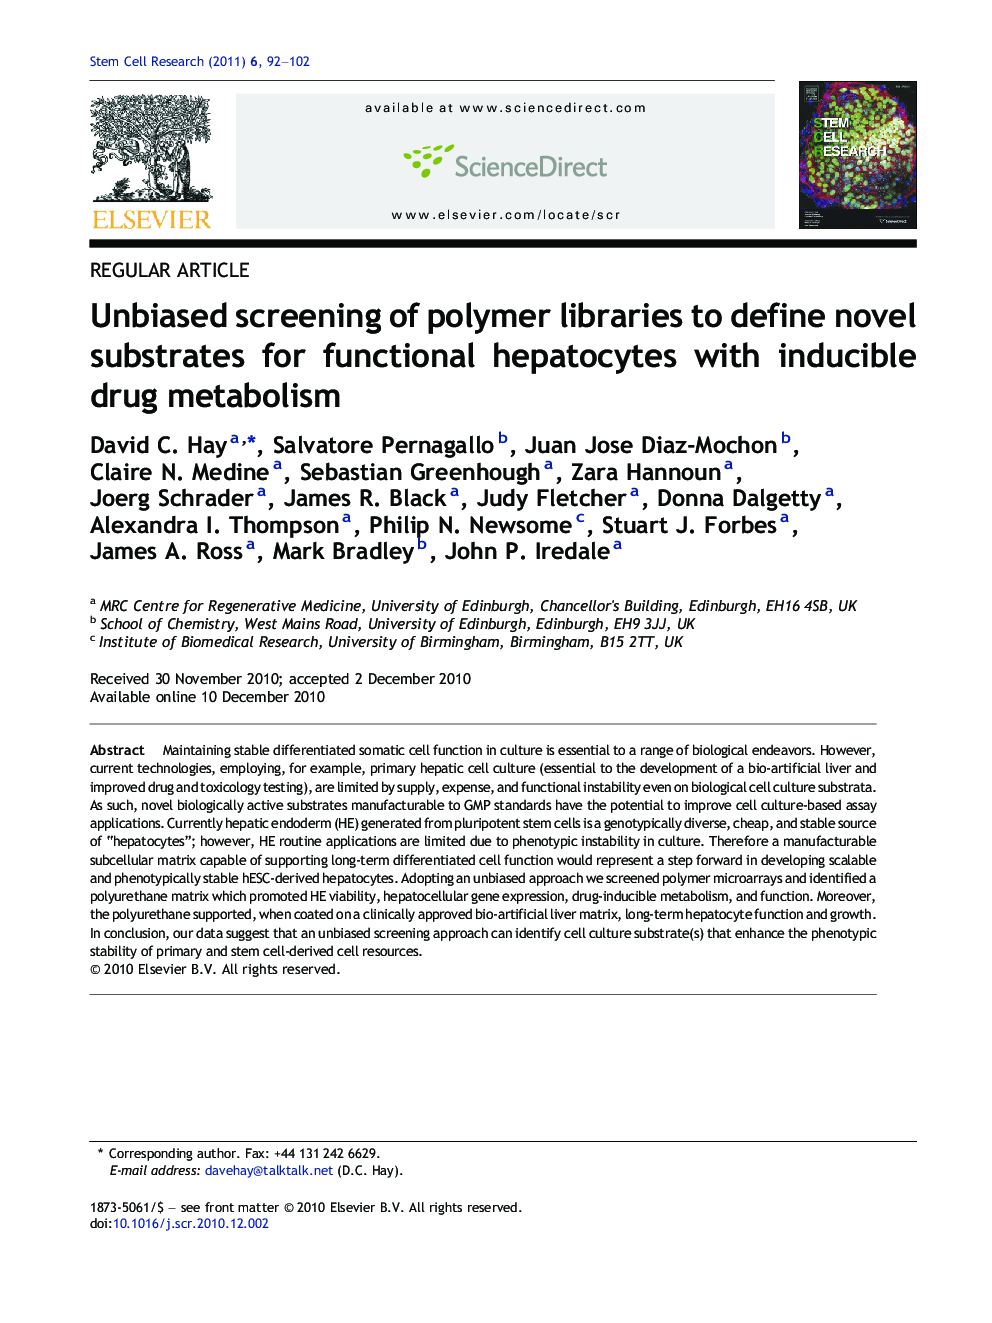 Unbiased screening of polymer libraries to define novel substrates for functional hepatocytes with inducible drug metabolism